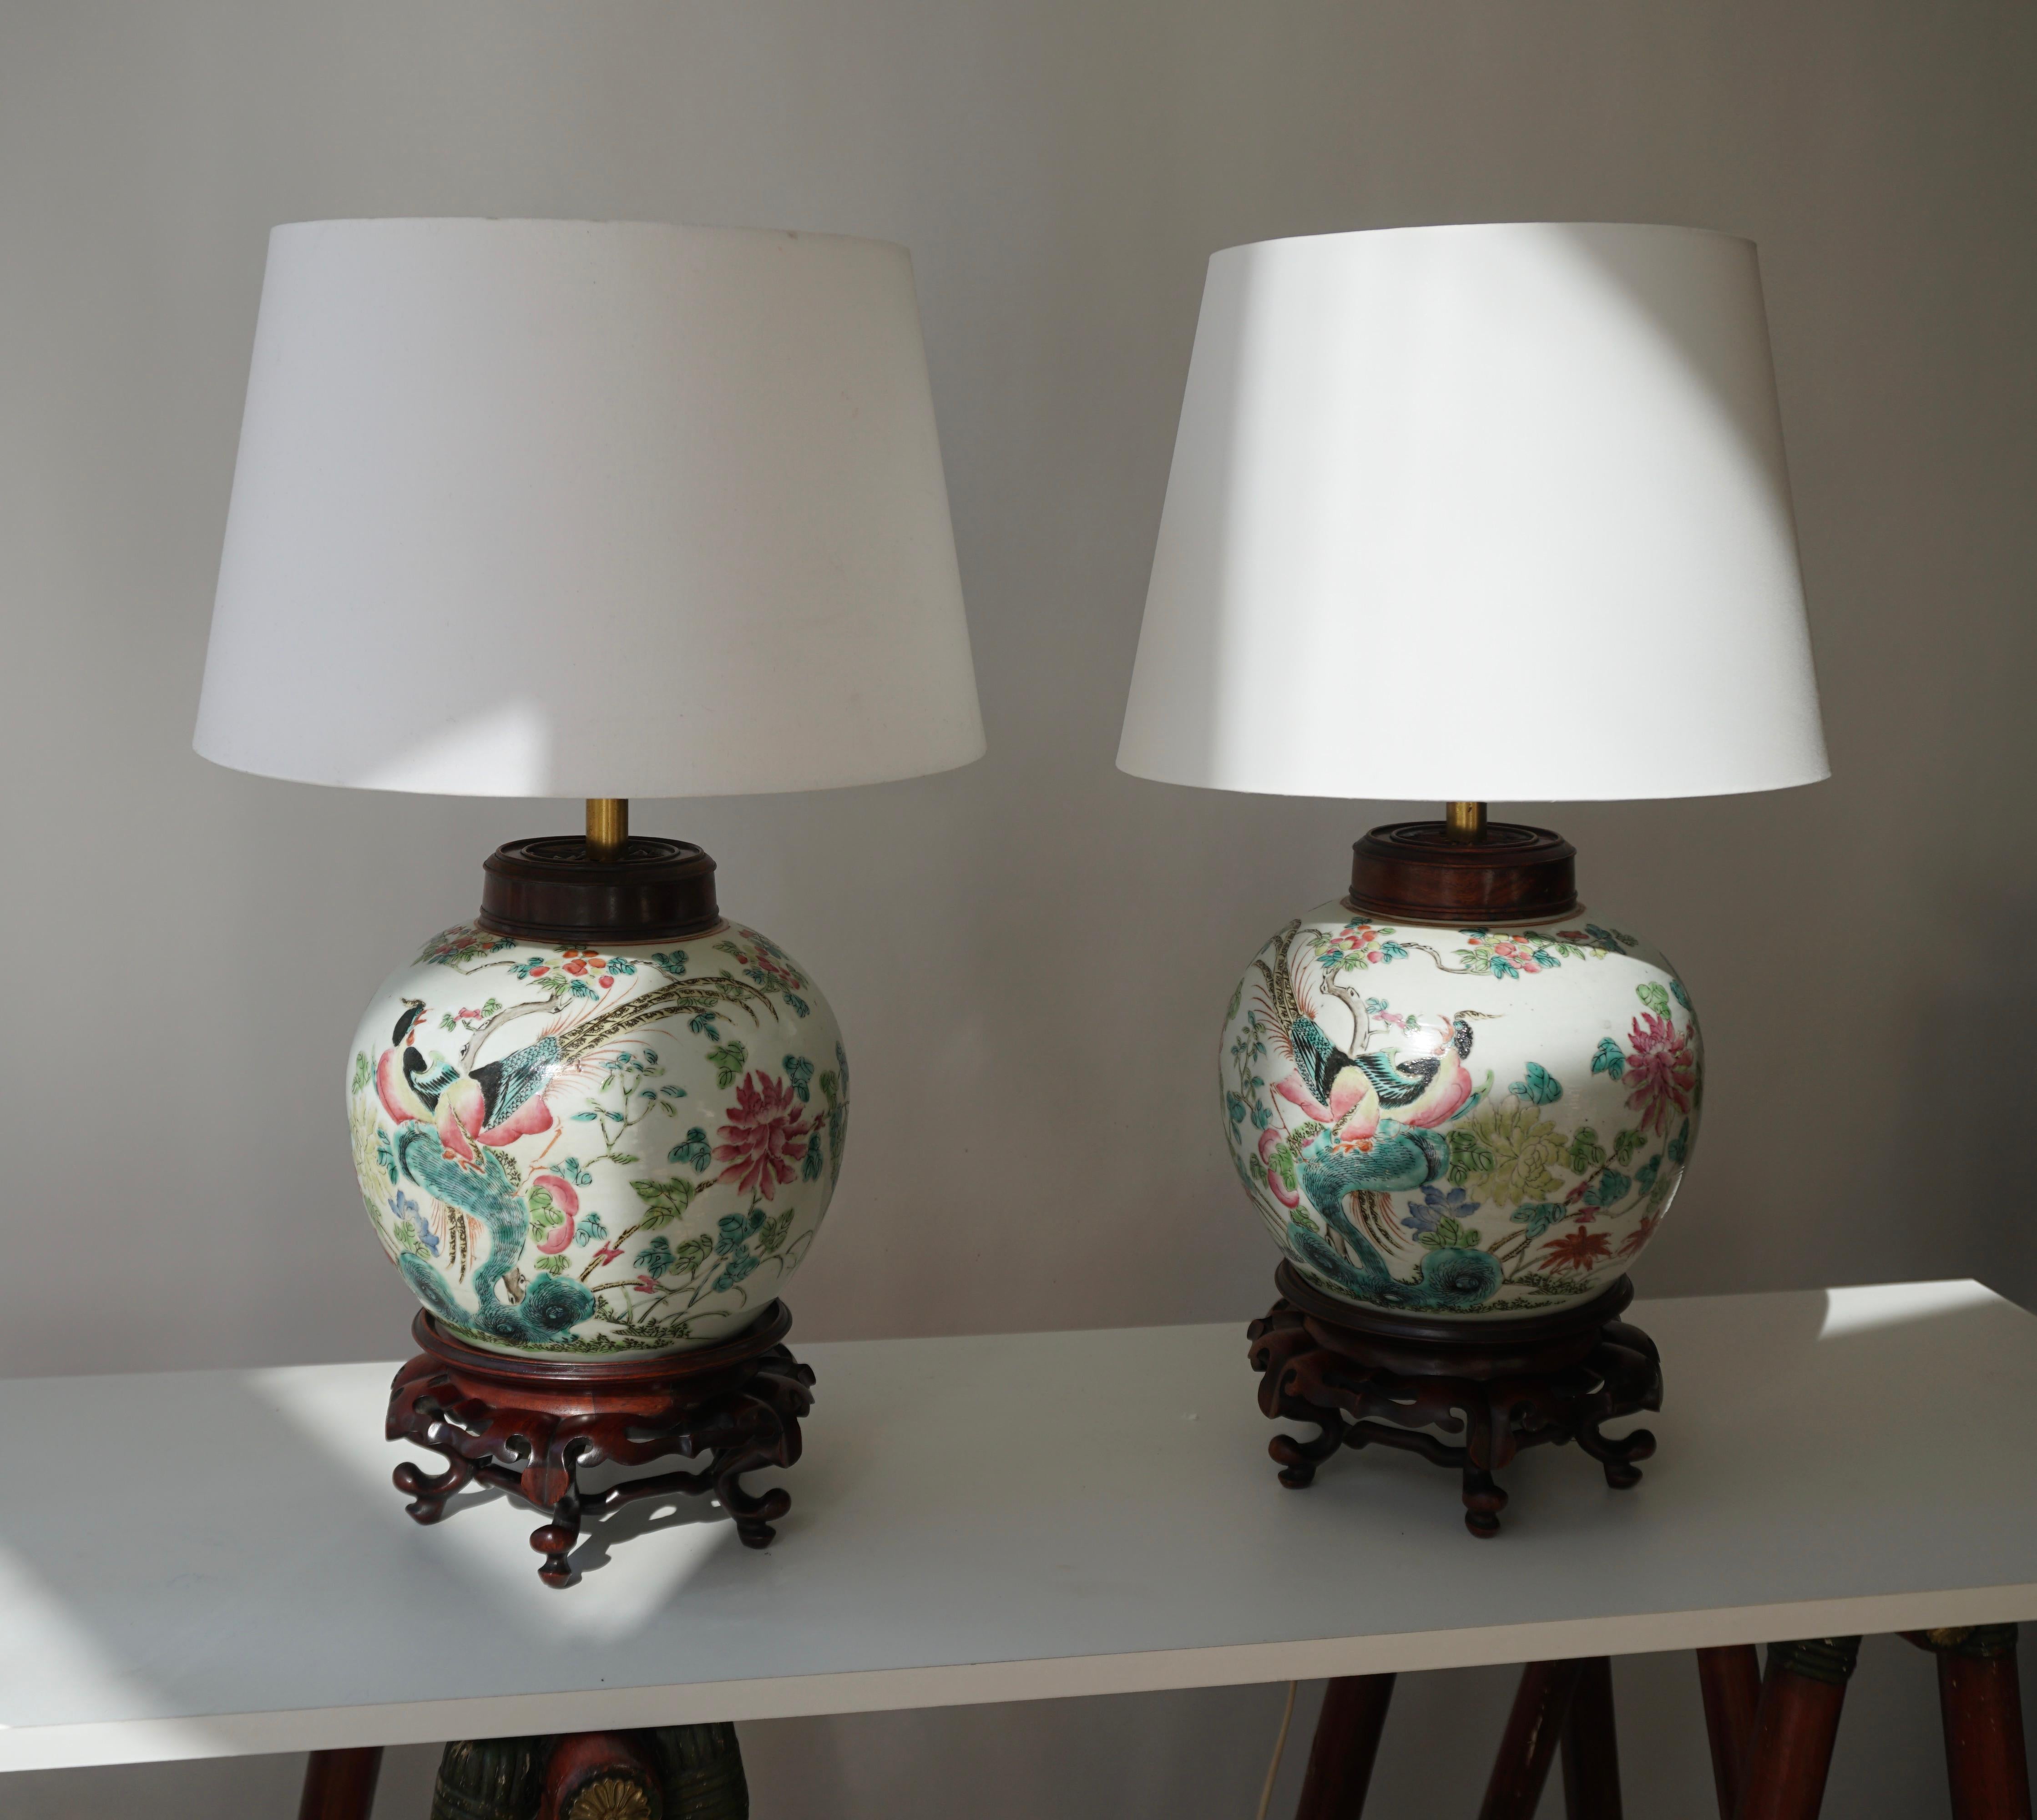 Pair of Chinese Export Porcelain Painted Ginger Jar Table Lamps with Birds 2